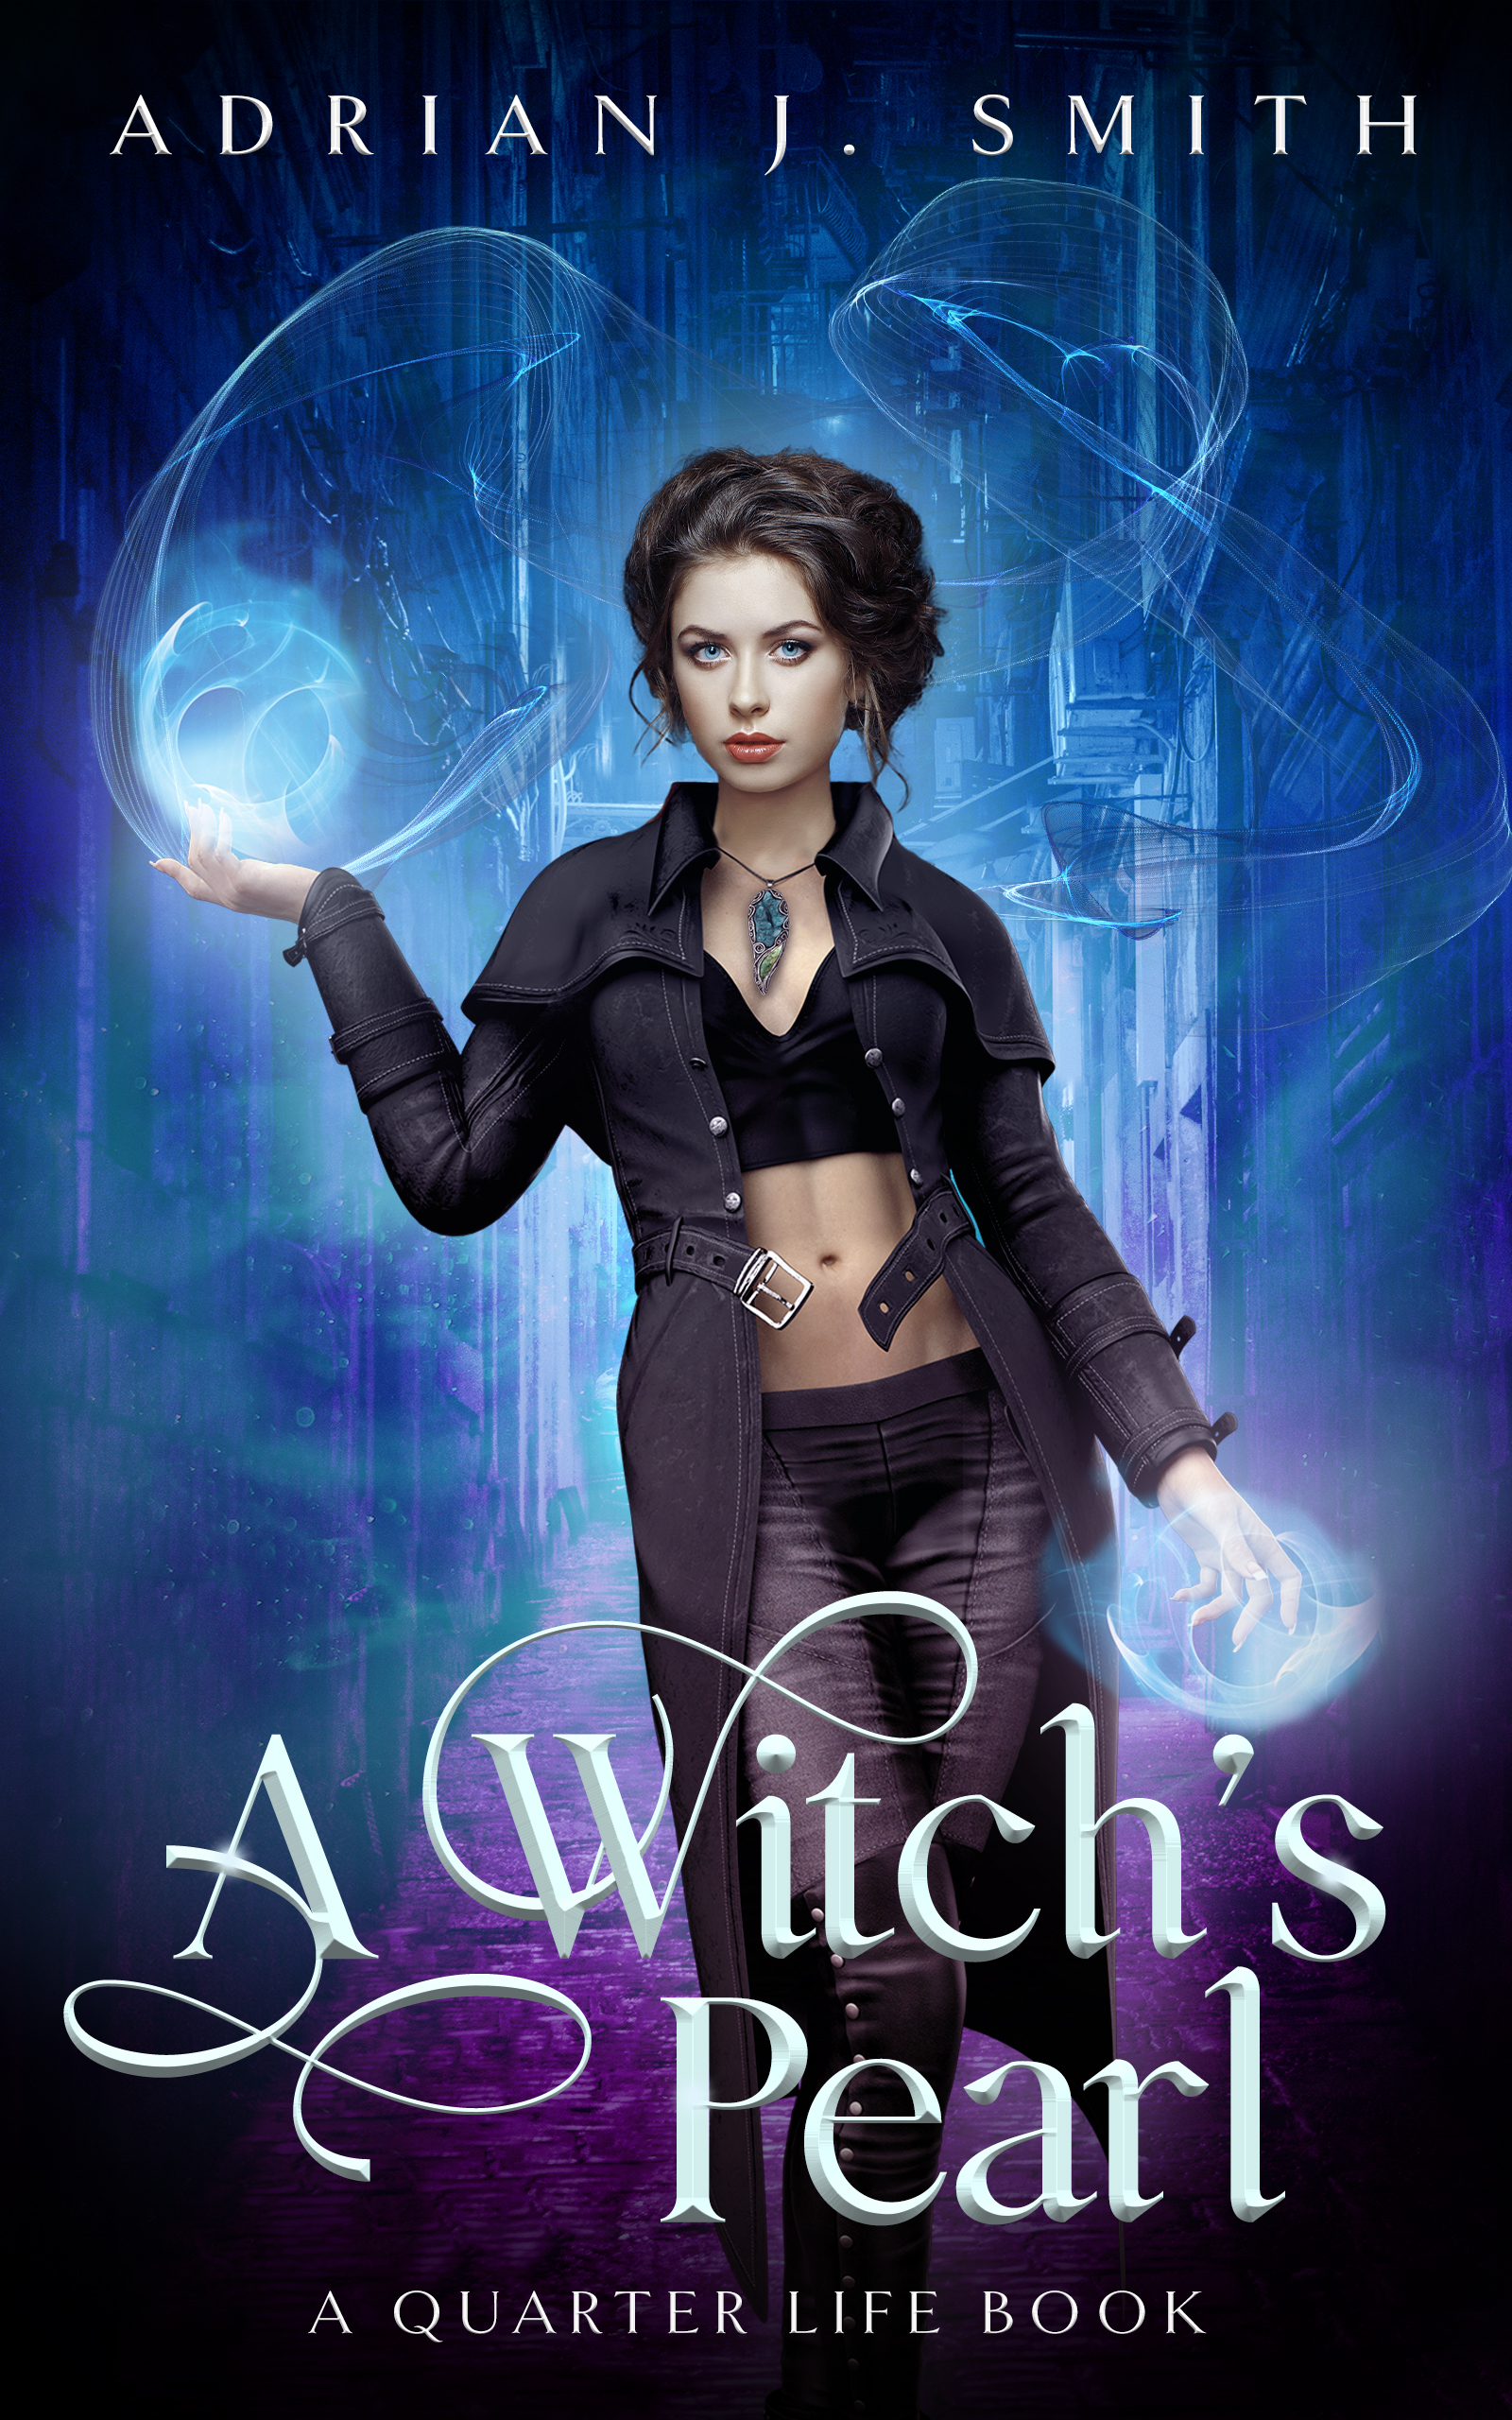 Urban fantasy book cover design with witch and magic.